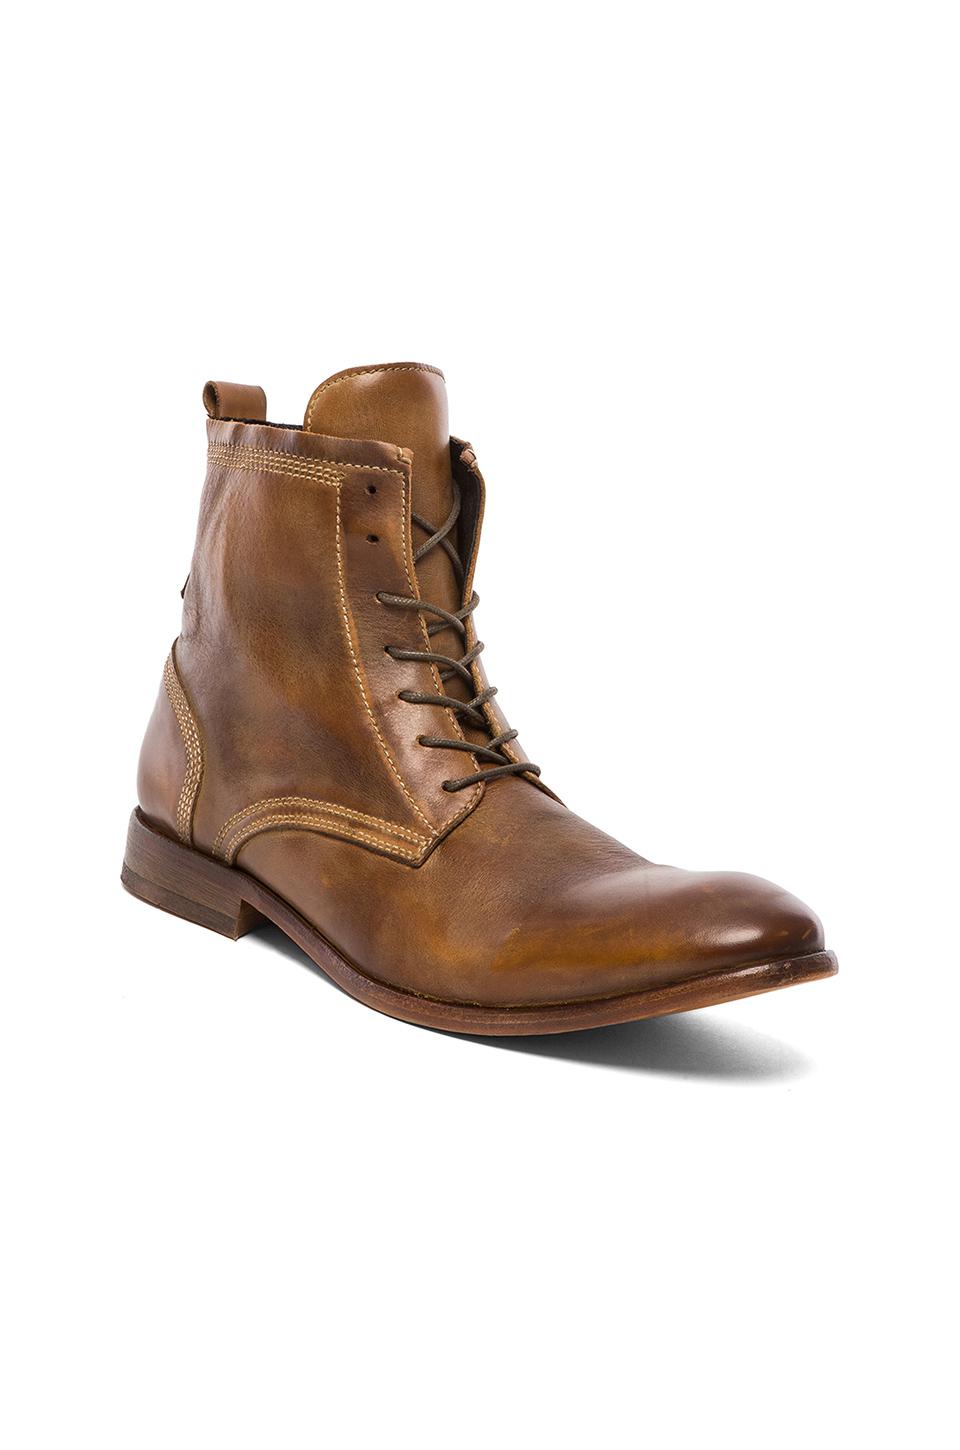 H by Hudson Leather Swathmore Boot in Tan (Brown) for Men - Lyst